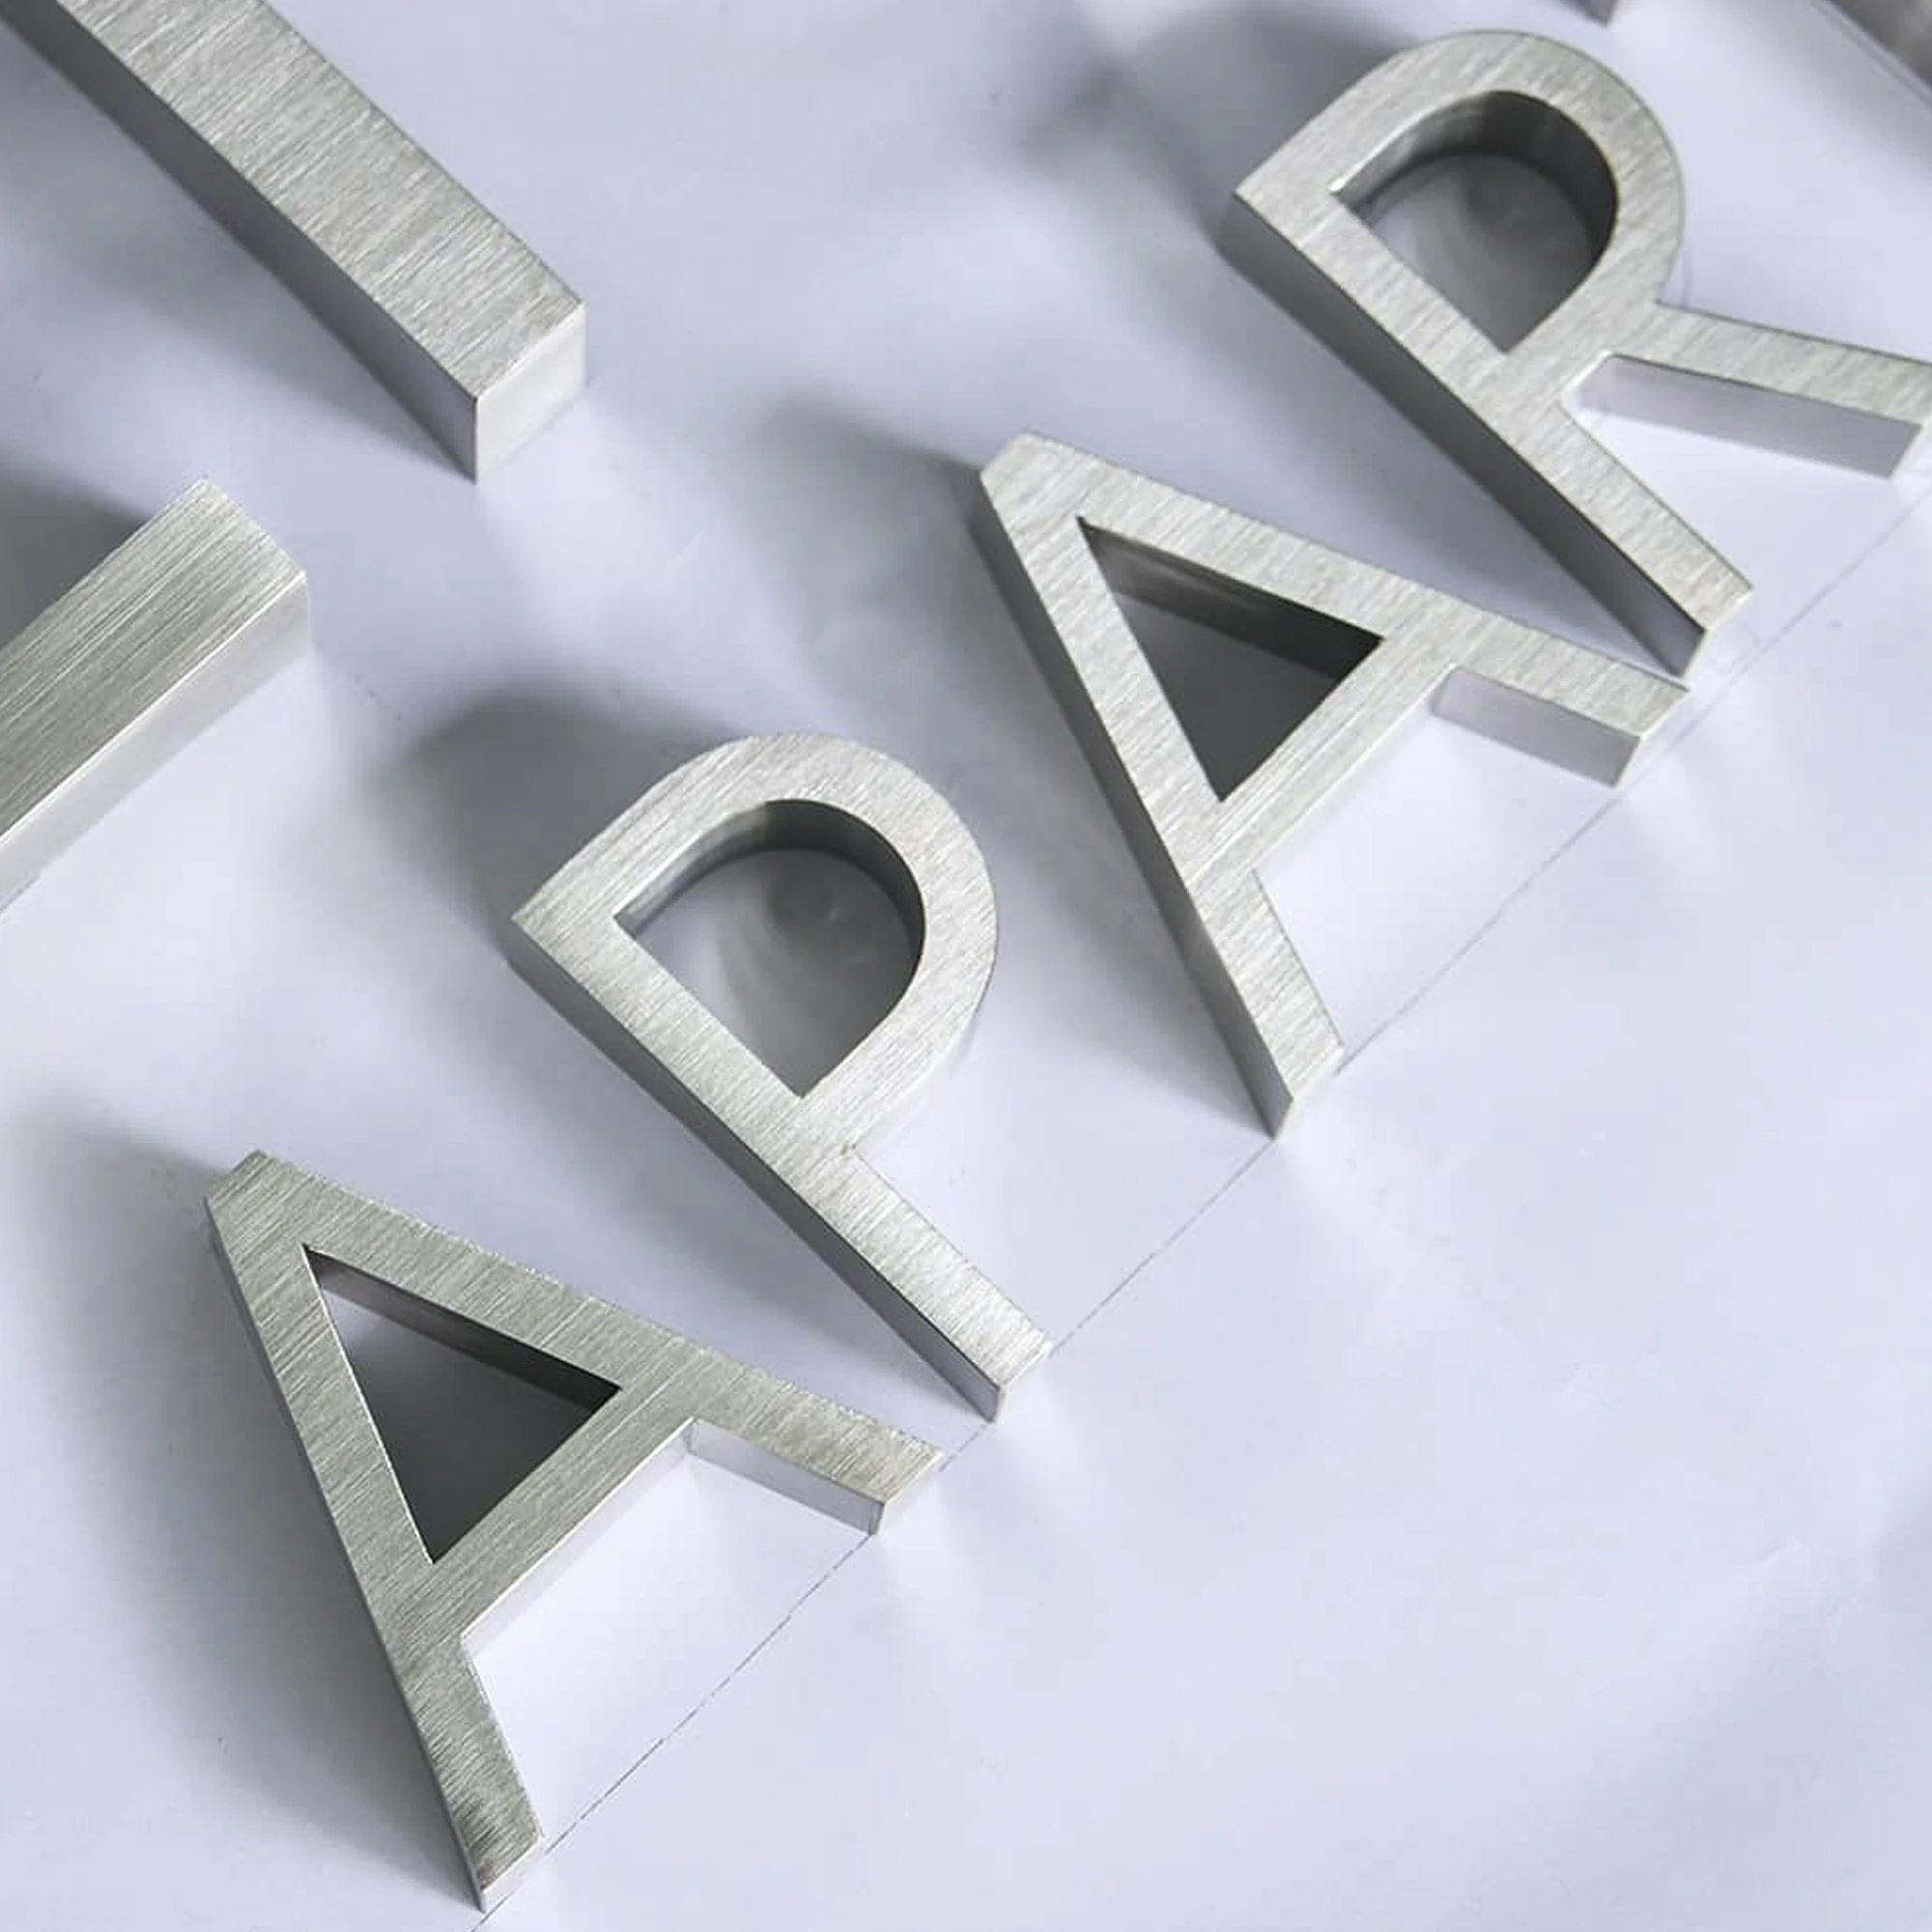 Brushed stainless steel 3D channel letter